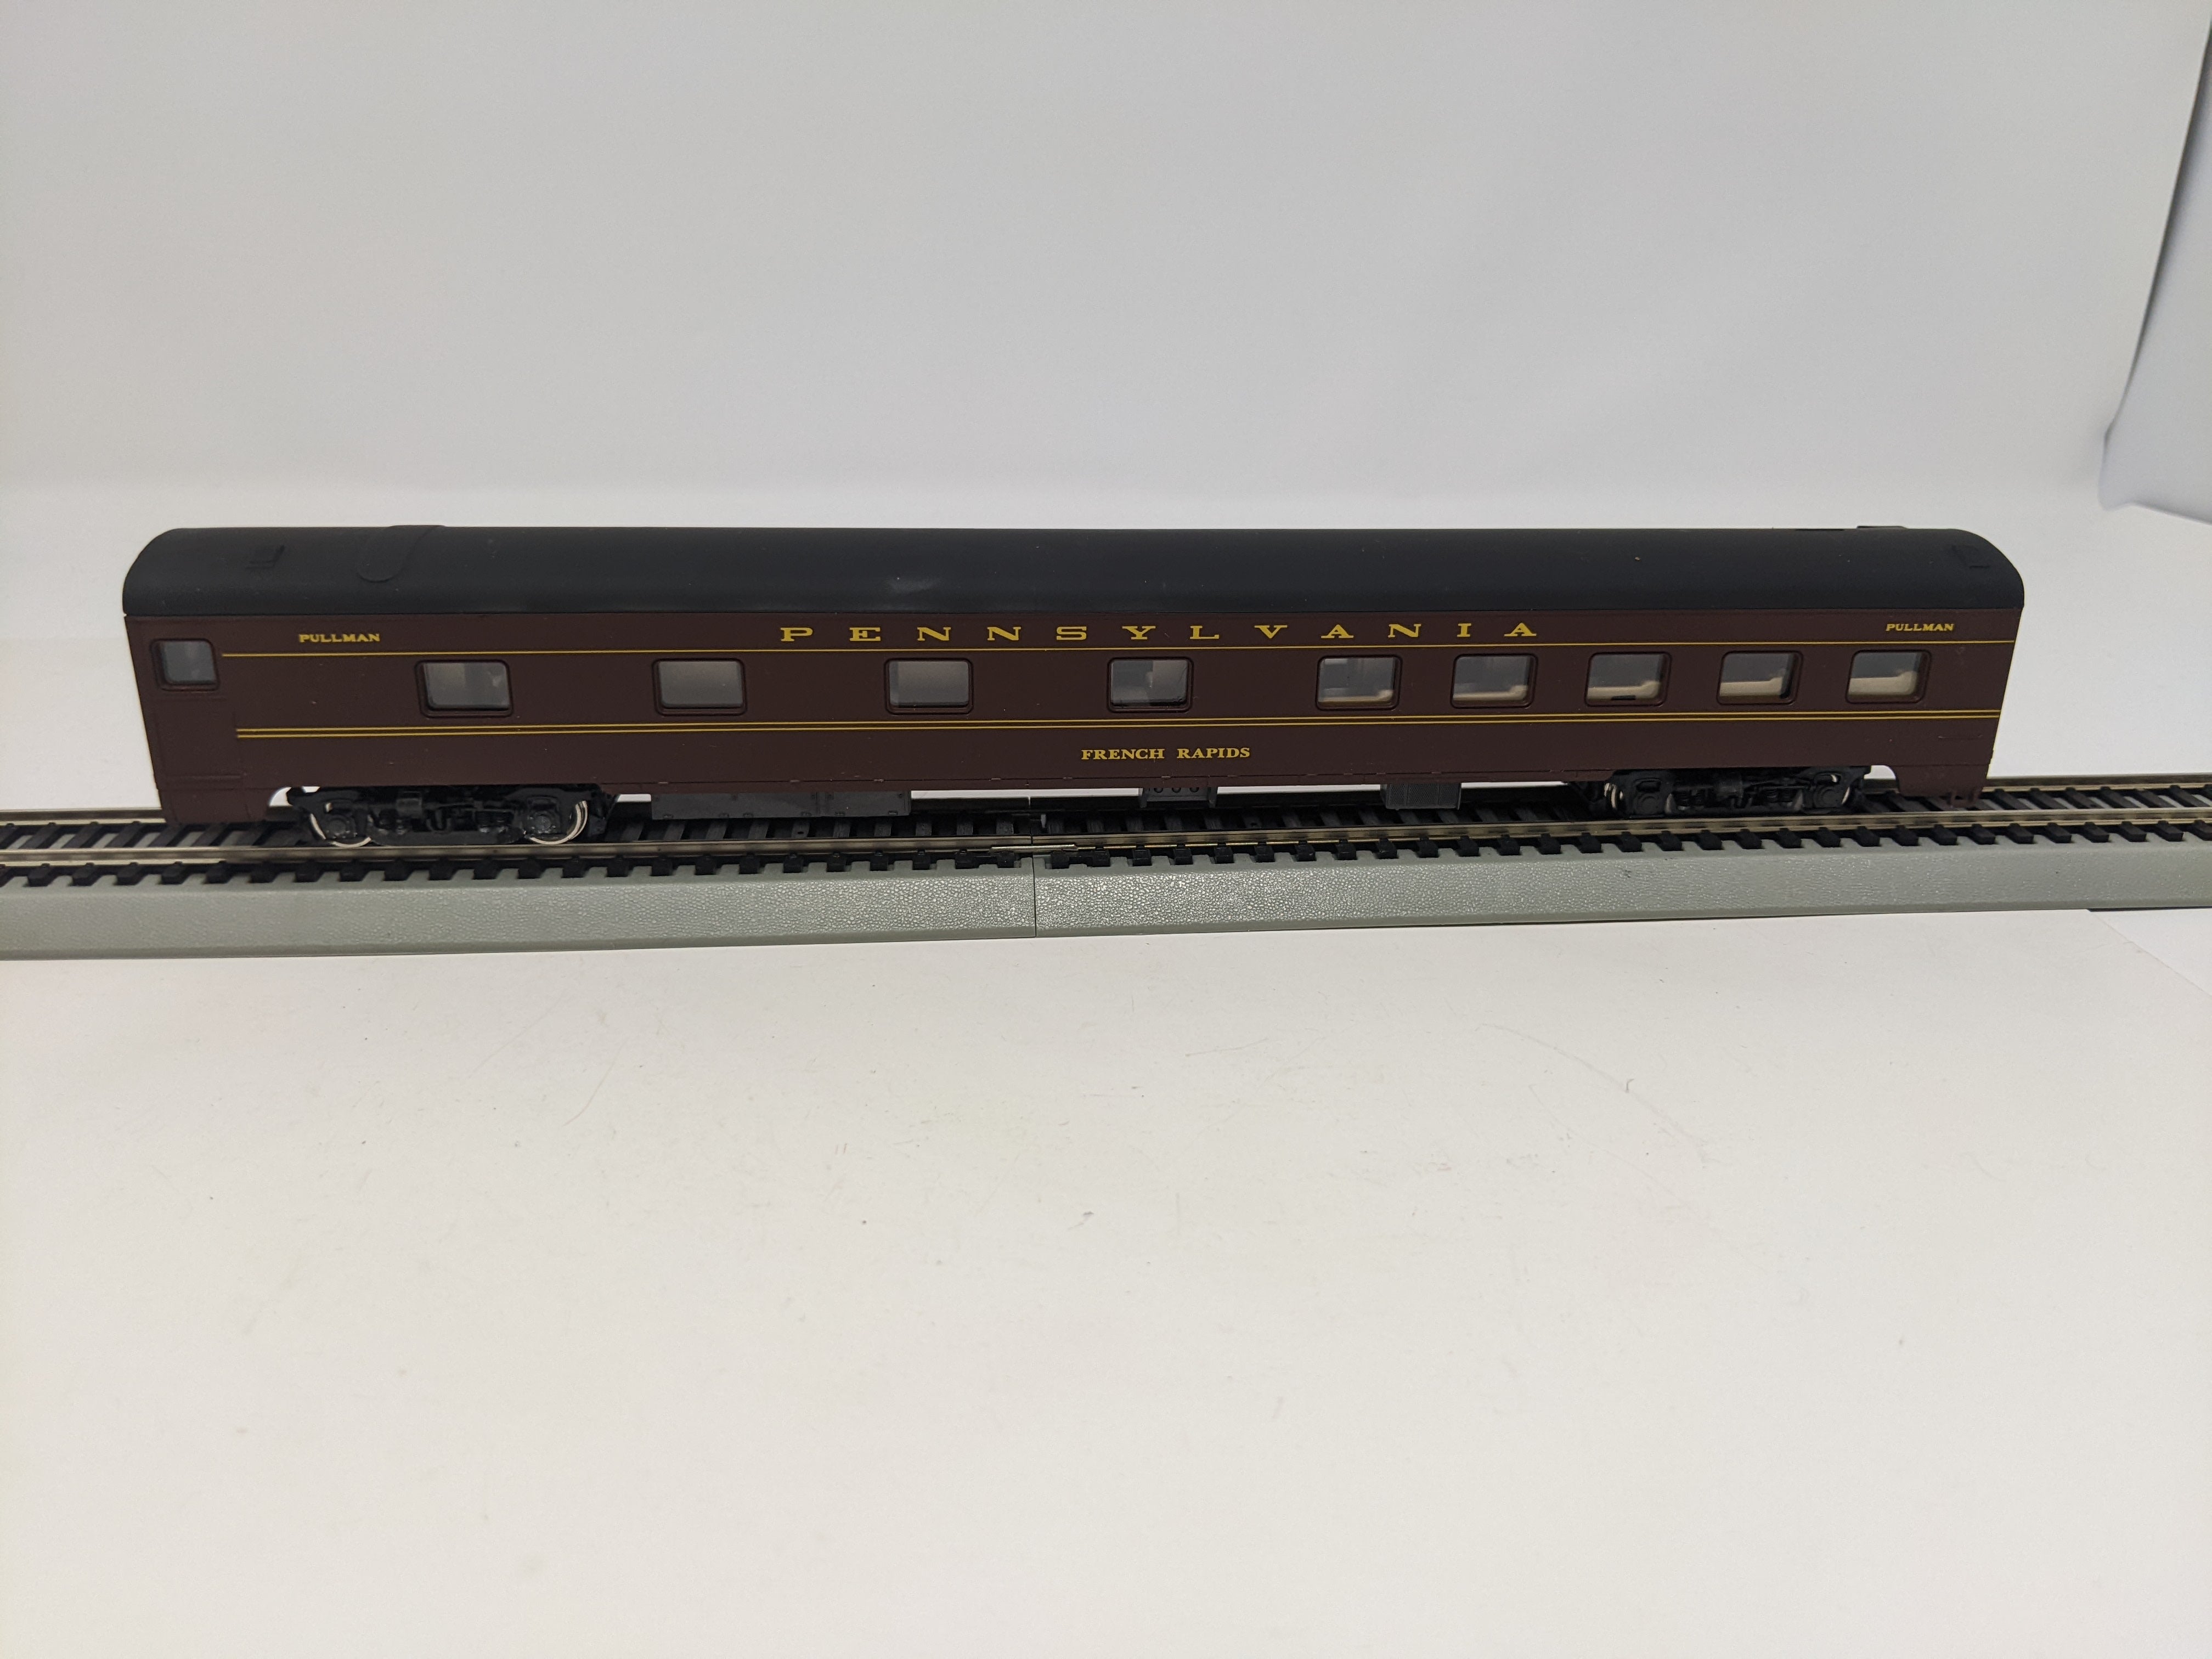 USED IHC 1722851 HO Scale, Smooth Side Roomette Passenger Car, Pennsylvania , French Rapids, Read Description